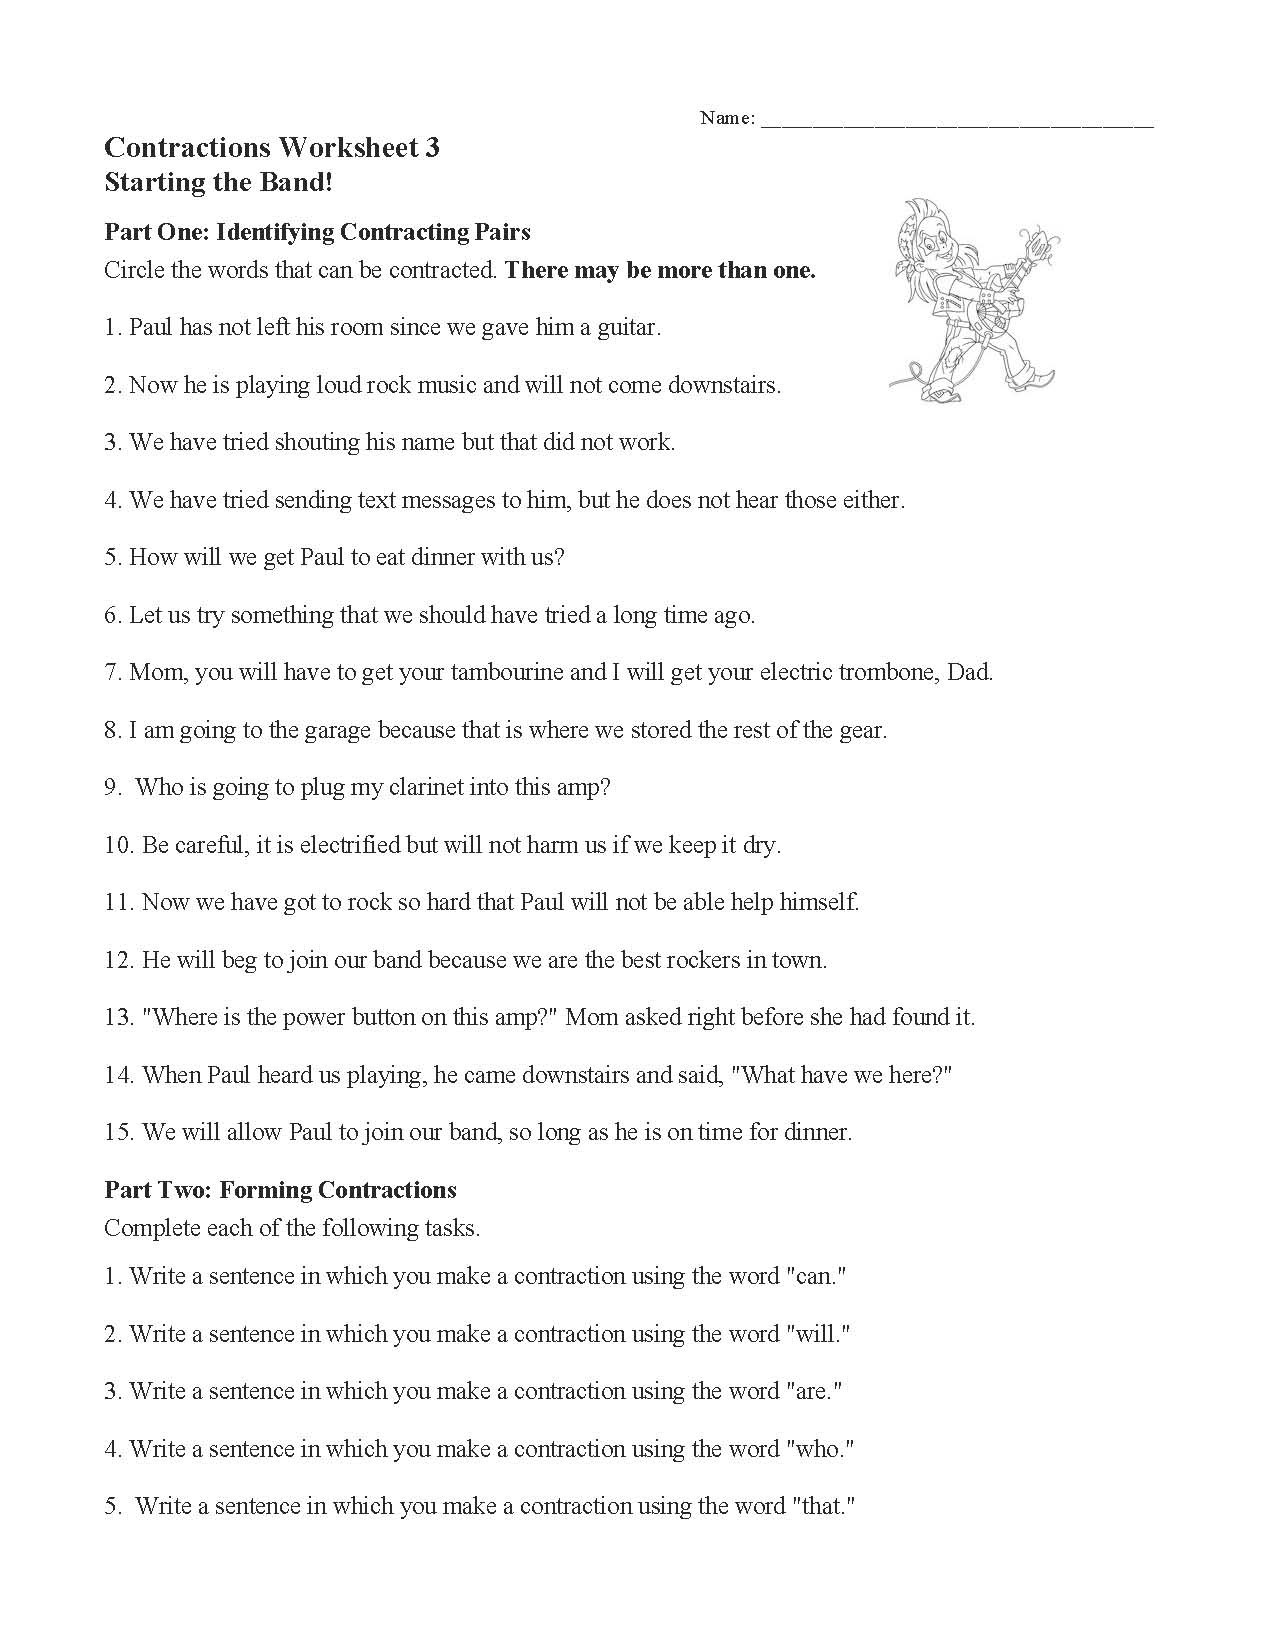 This is a preview image of Contractions Worksheet 3. Click on it to enlarge it or view the source file.